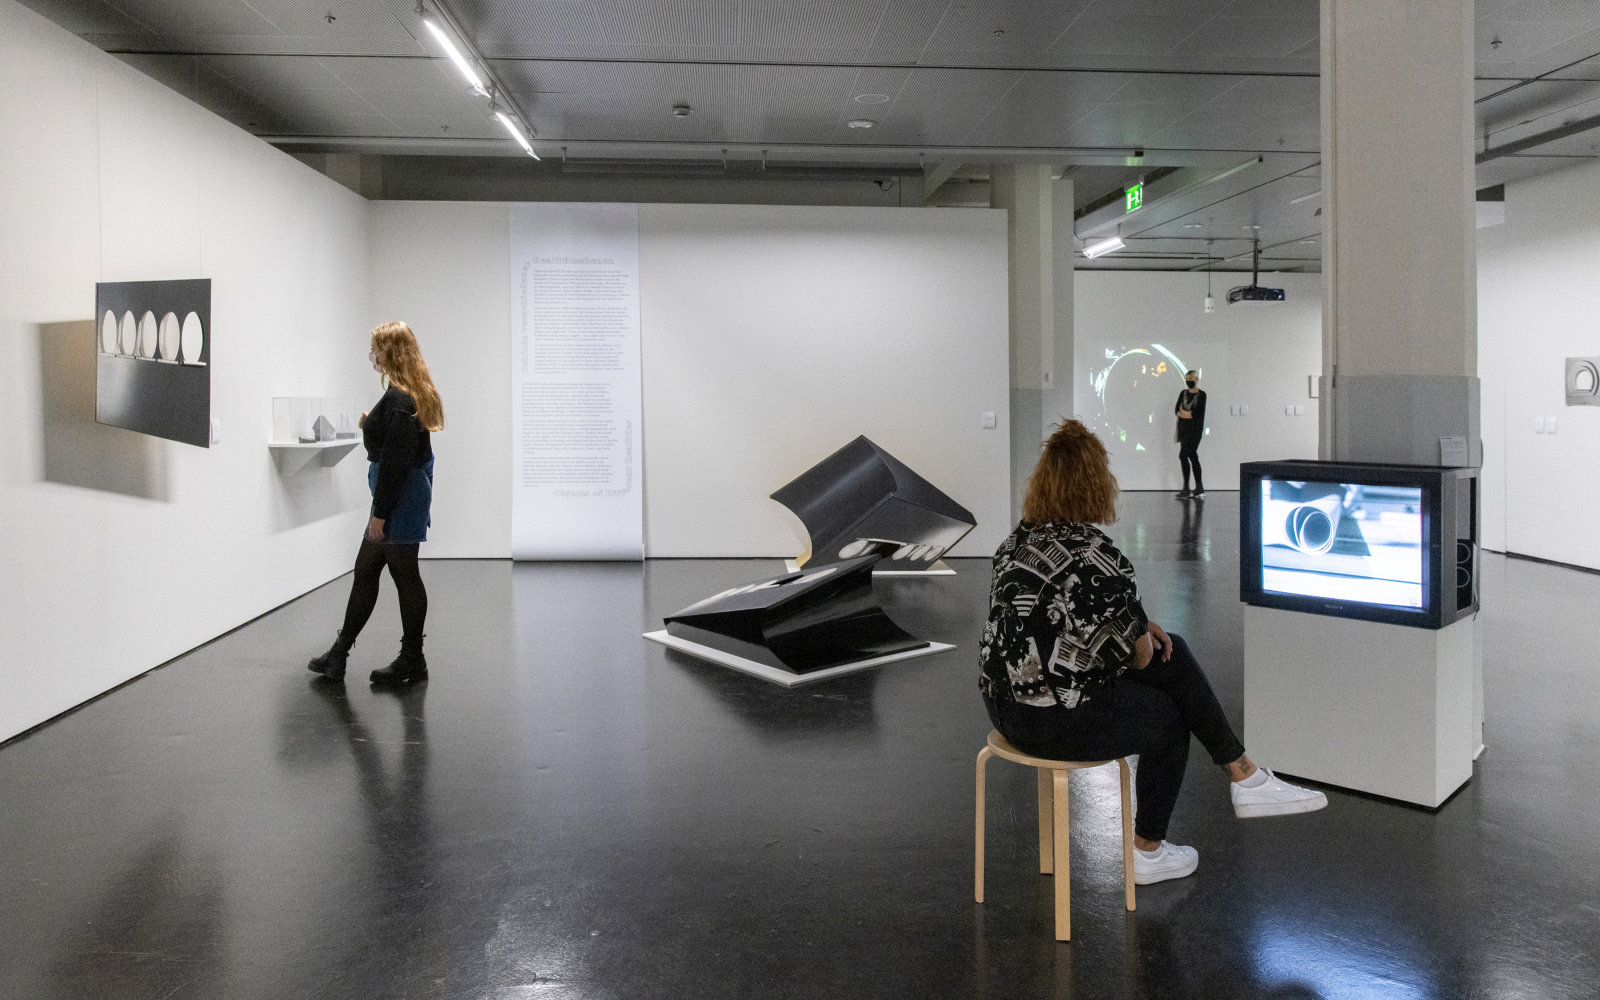 Three women in the exhibition. The woman on the left is looking at a sculpture that is hung on the wall, the woman on the right is watching a film on a TV, in the middle are abstract figures, on the back wall is a wallpaper roll with text on it.